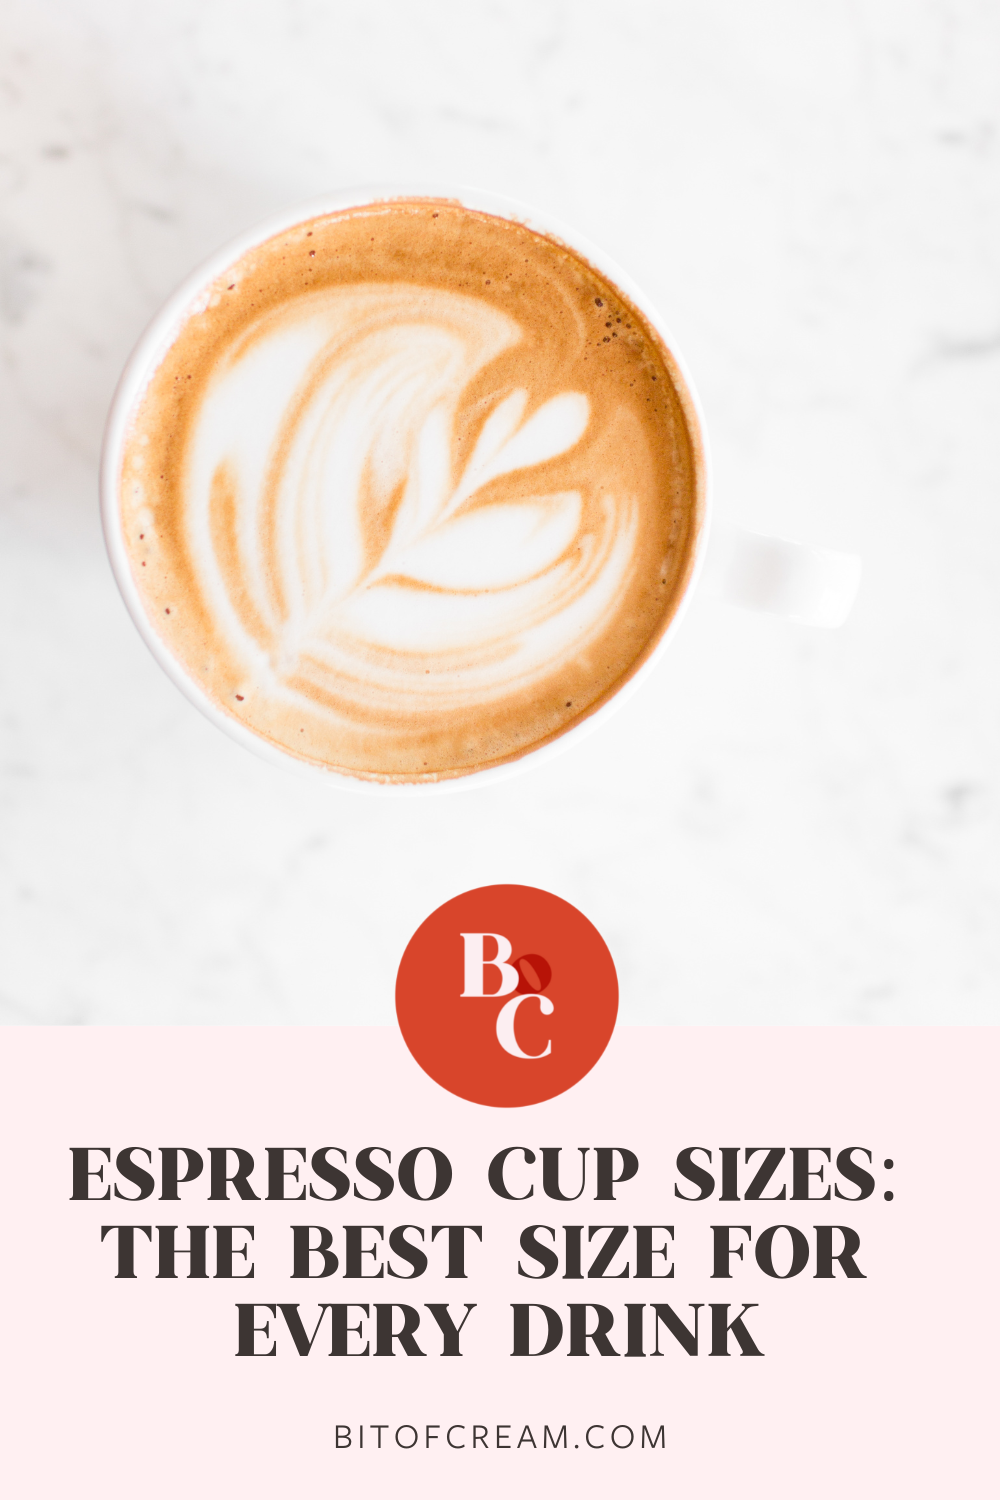 Espresso Cup Sizes: The Best Size For Every Drink